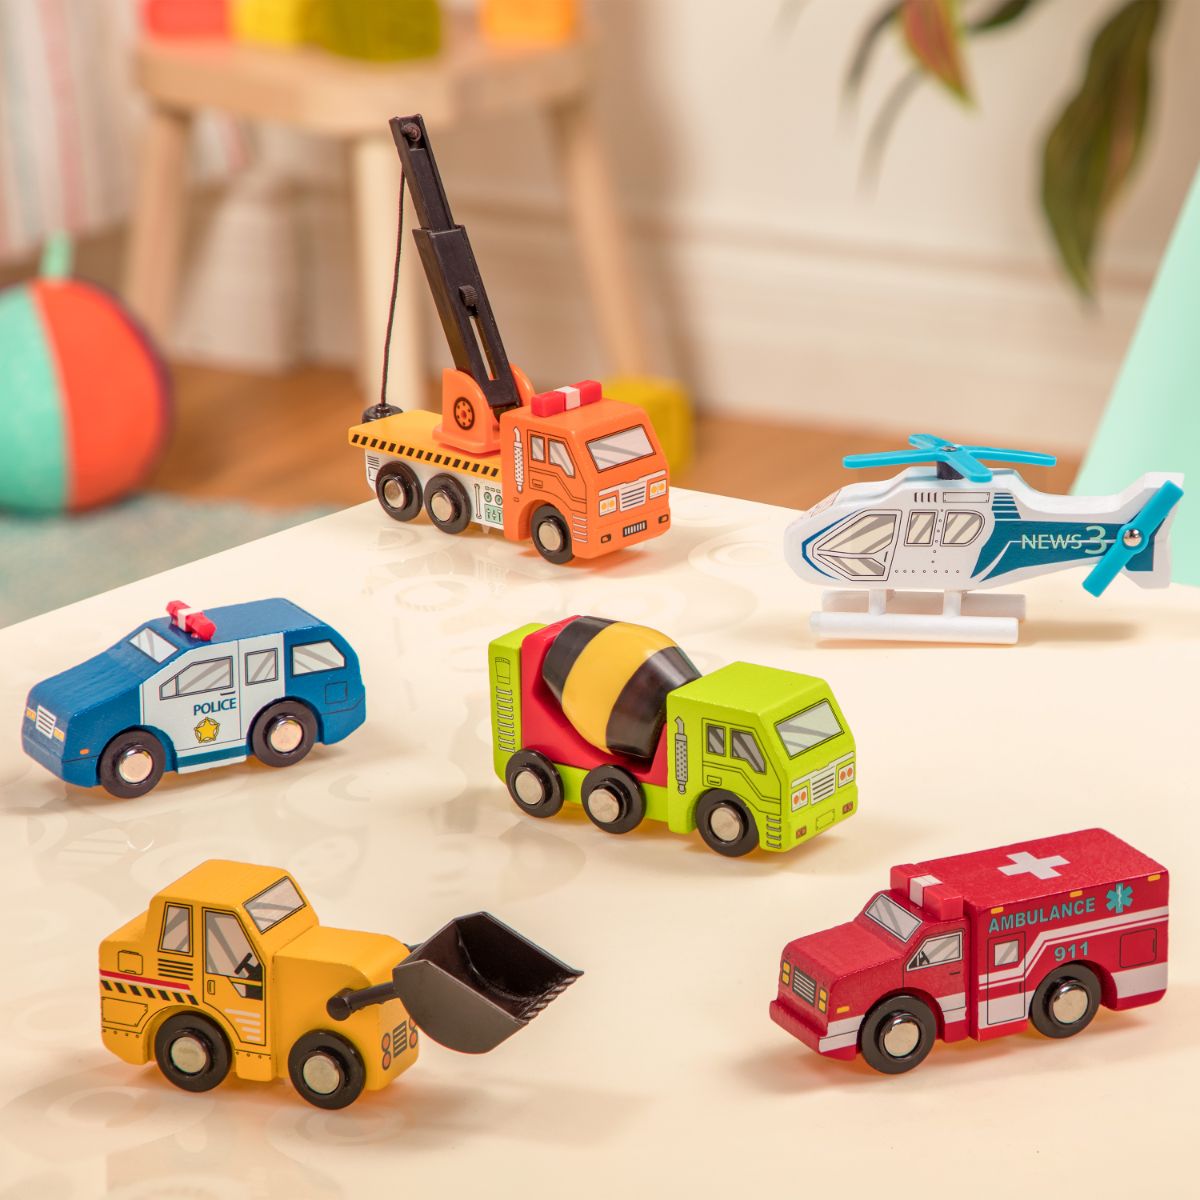 Wood & Wheels - Vehicles, Wooden Toy Vehicles